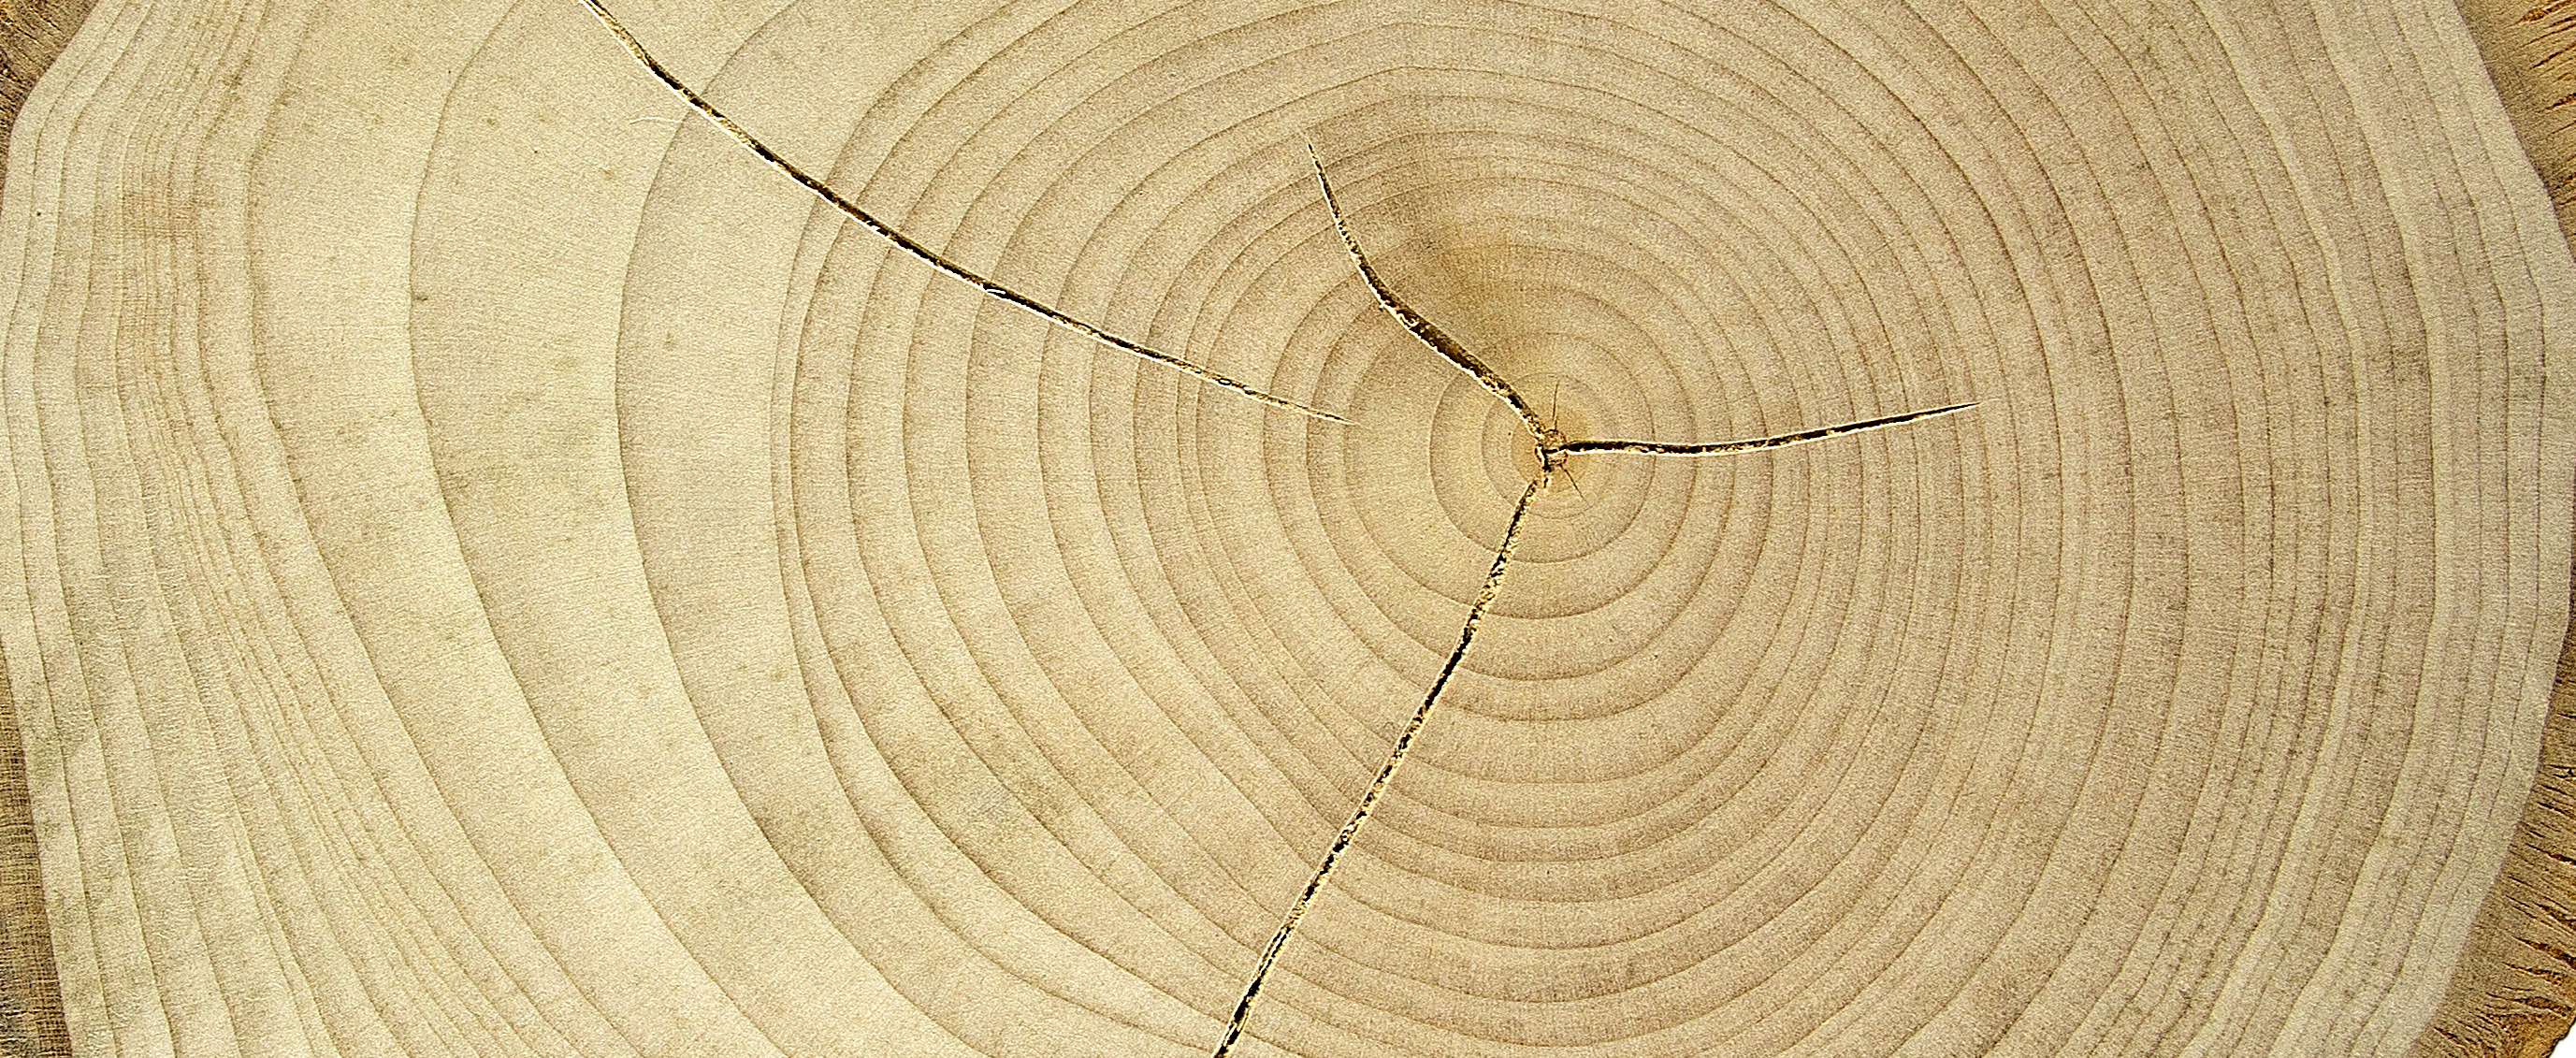 17 September: dendrochronology, a history imprinted in wood